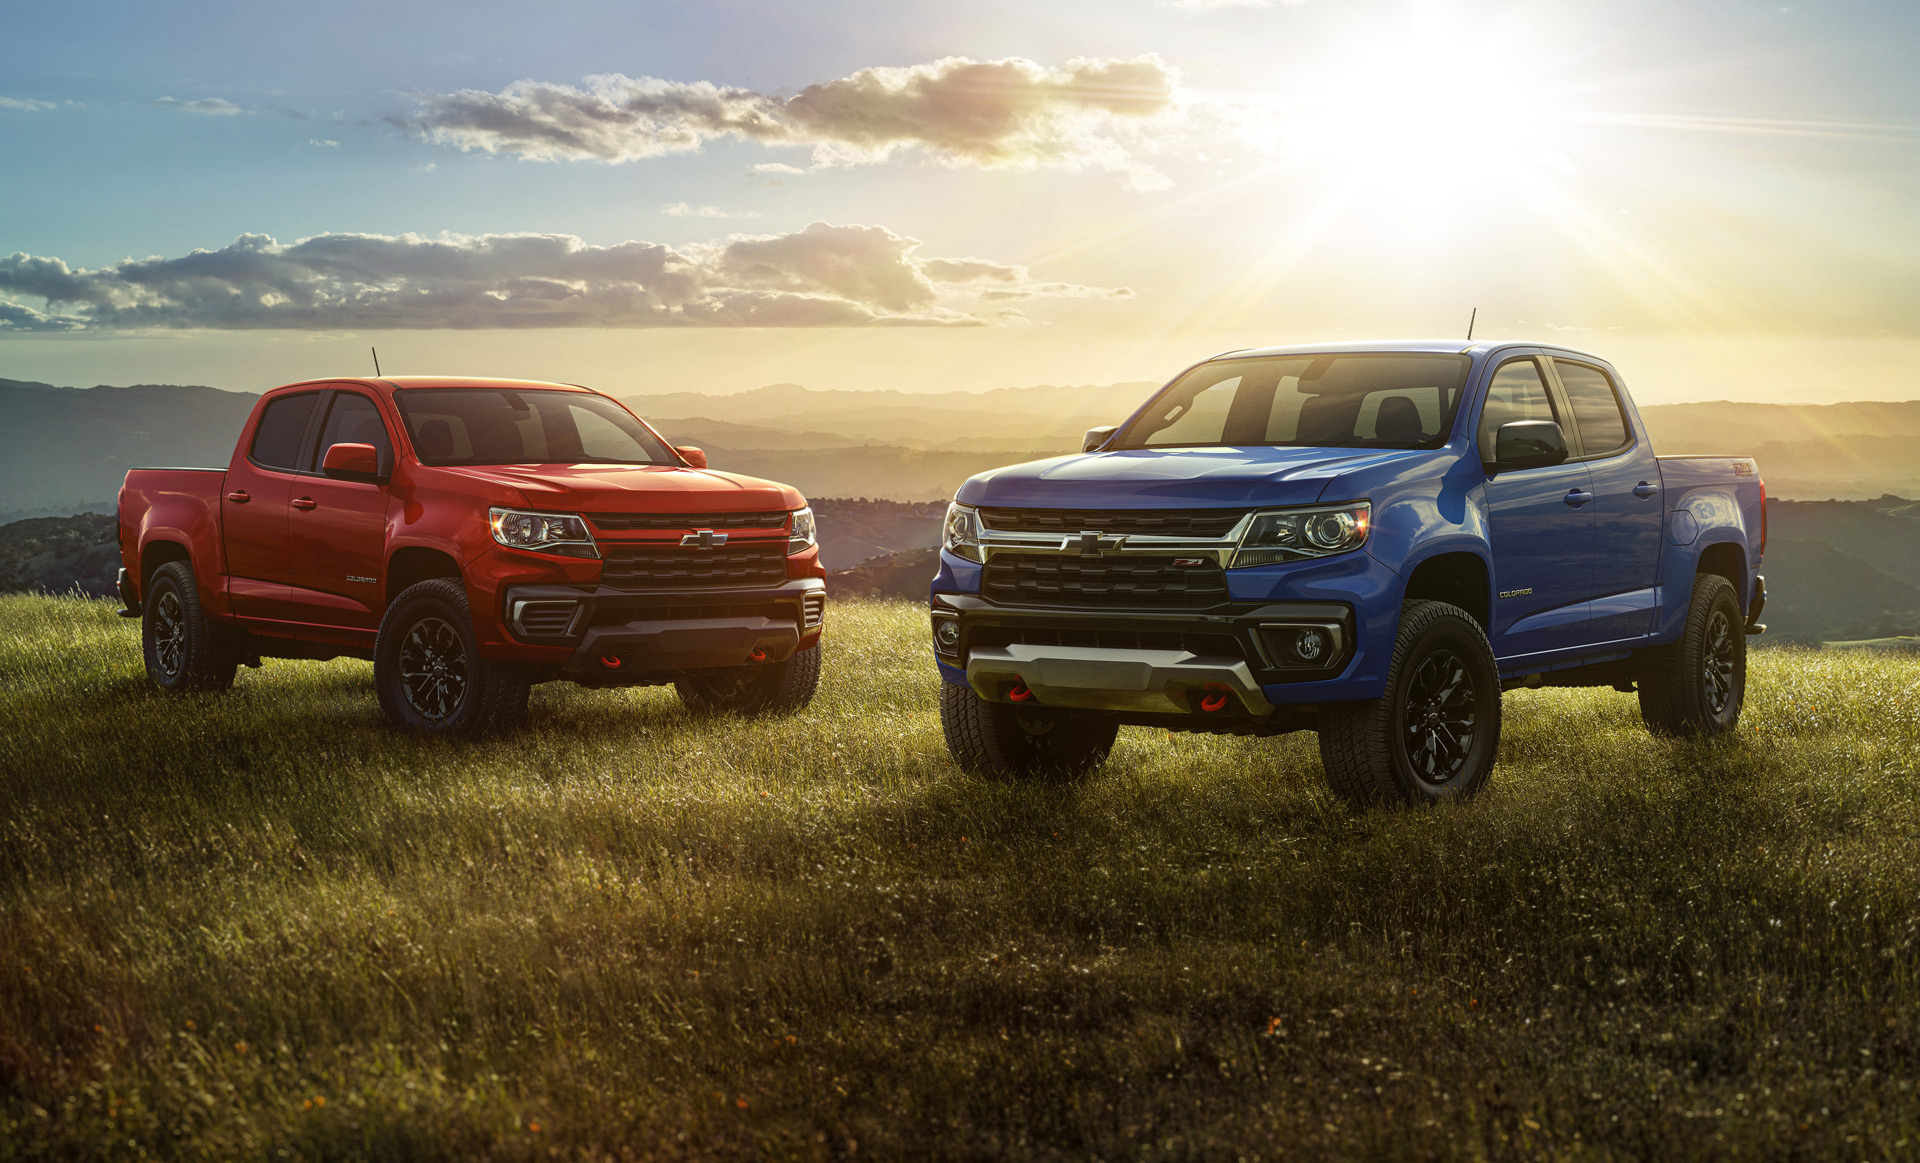 2022 Chevrolet Colorado (Chevy) Review, Ratings, Specs, Prices, and Photo Car Connection